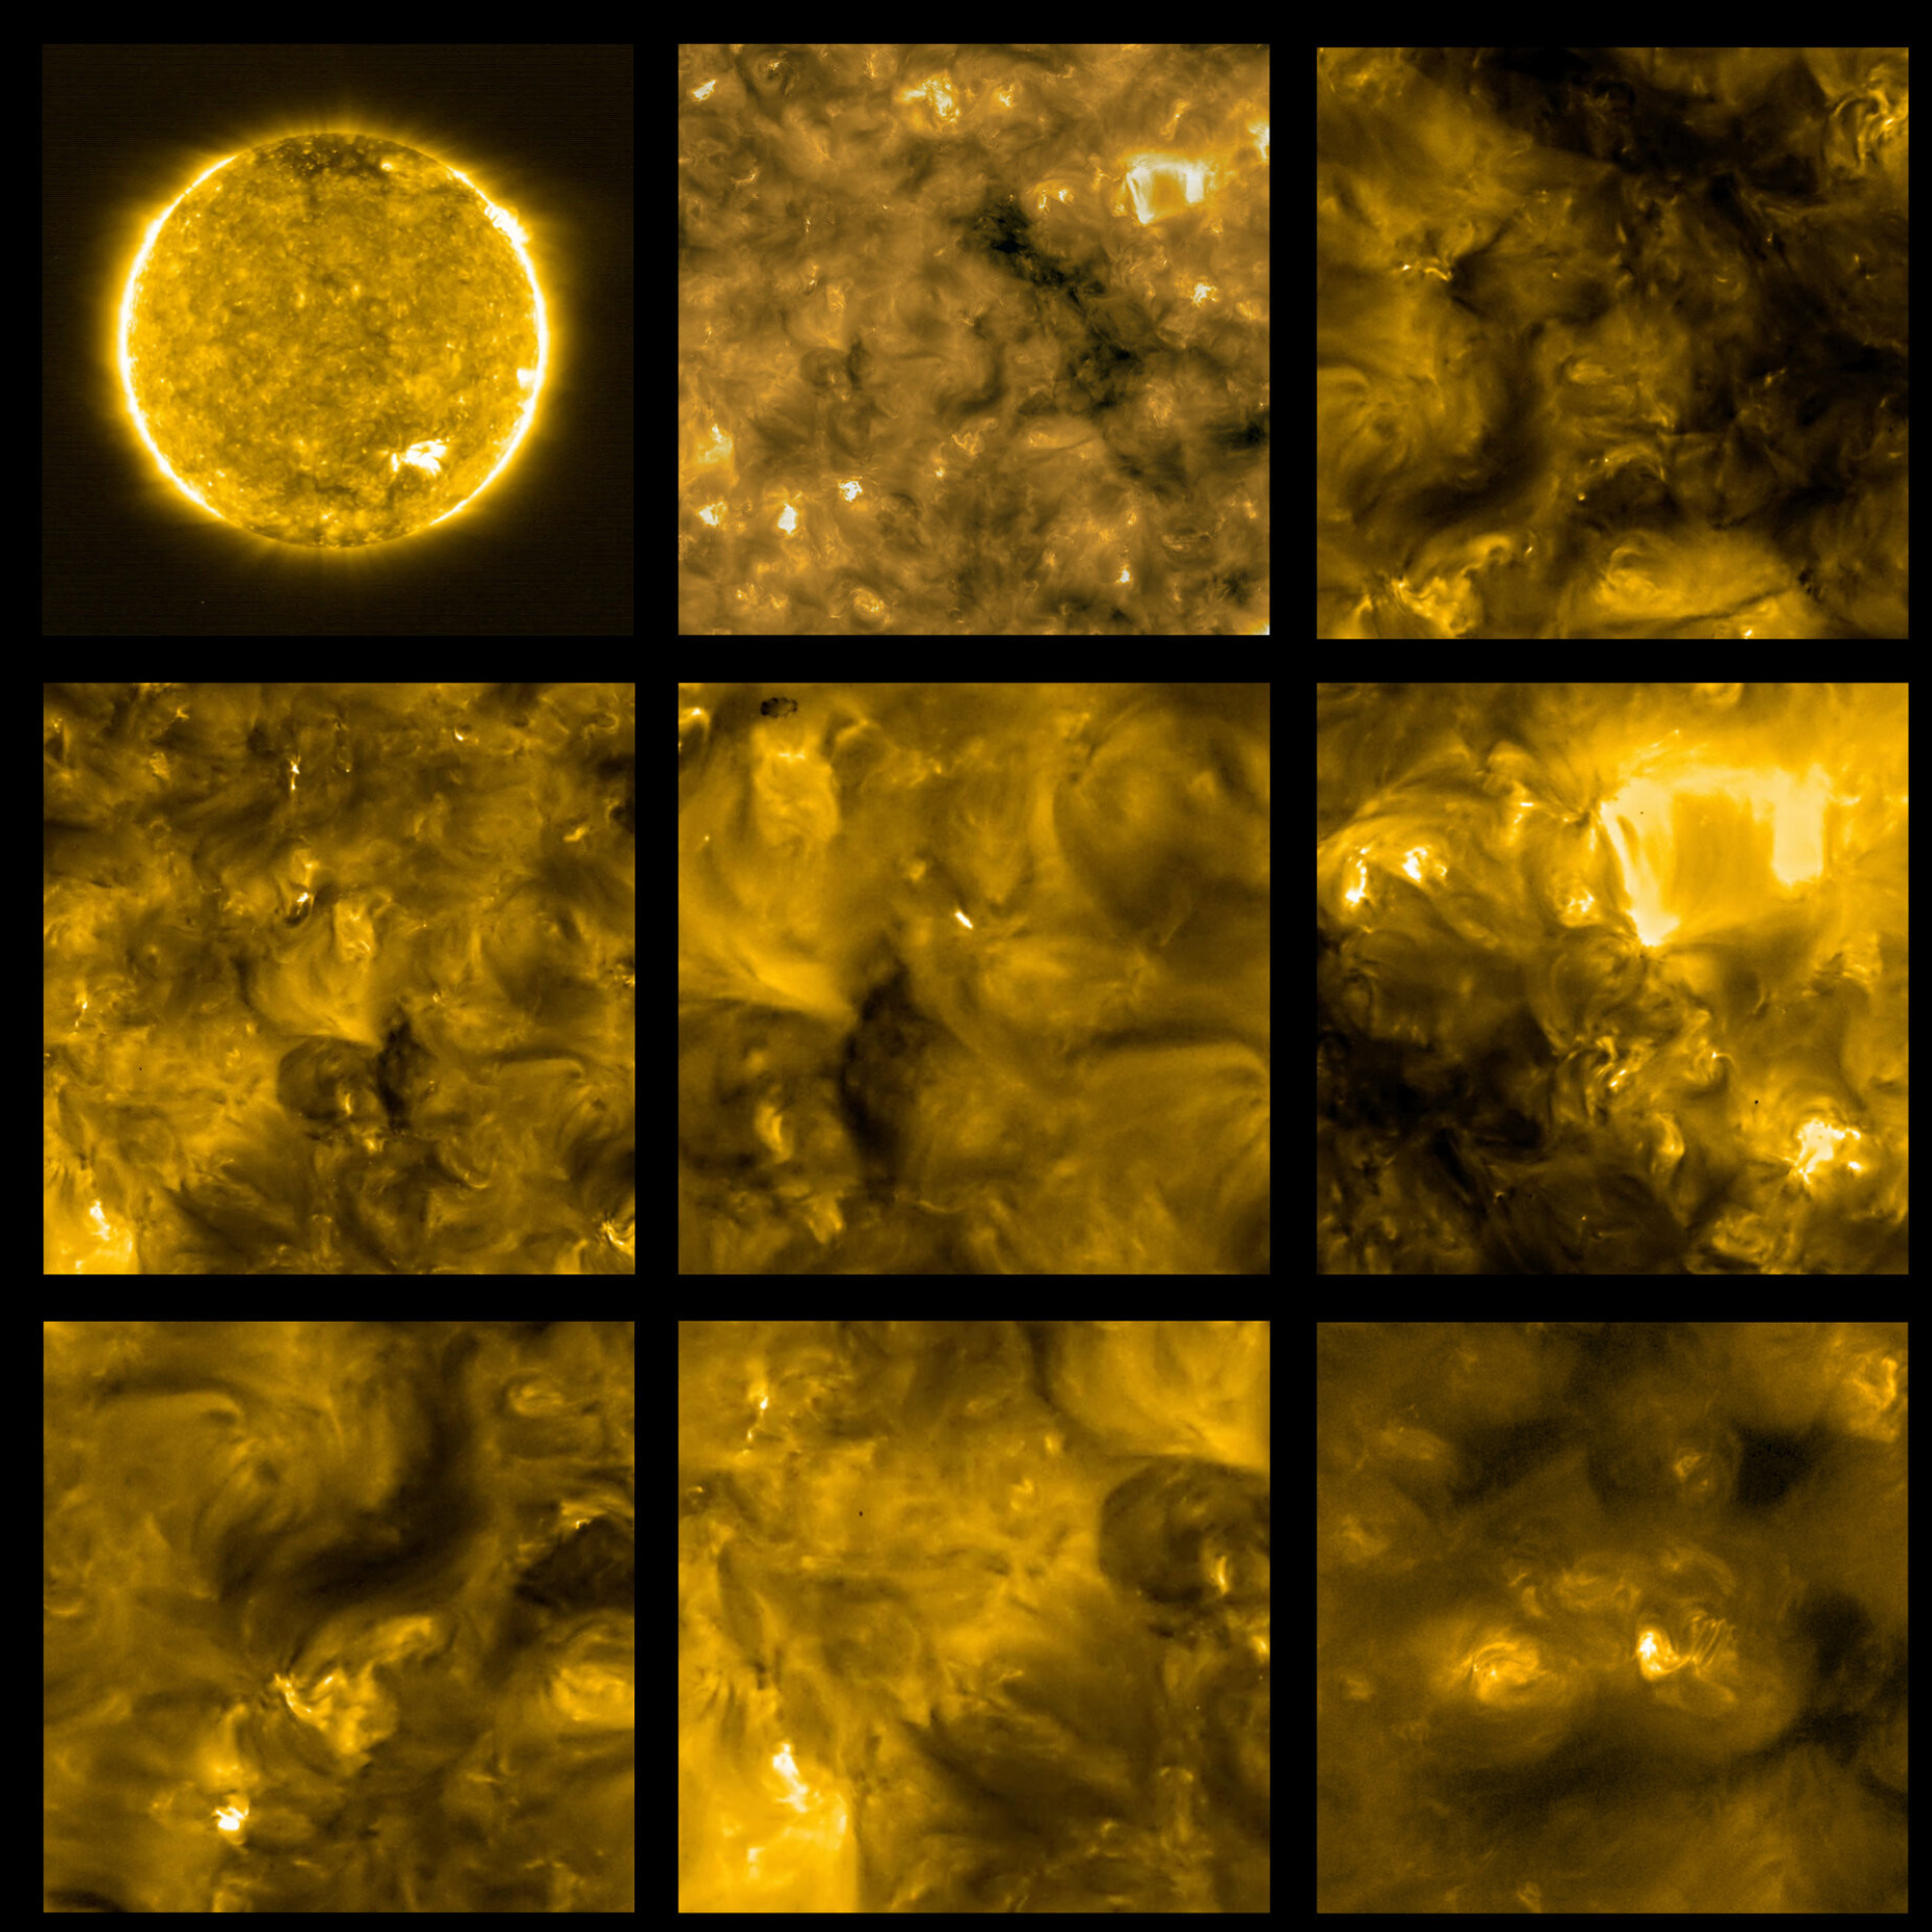 Close-up images of the Sun showing mini flares on the surface